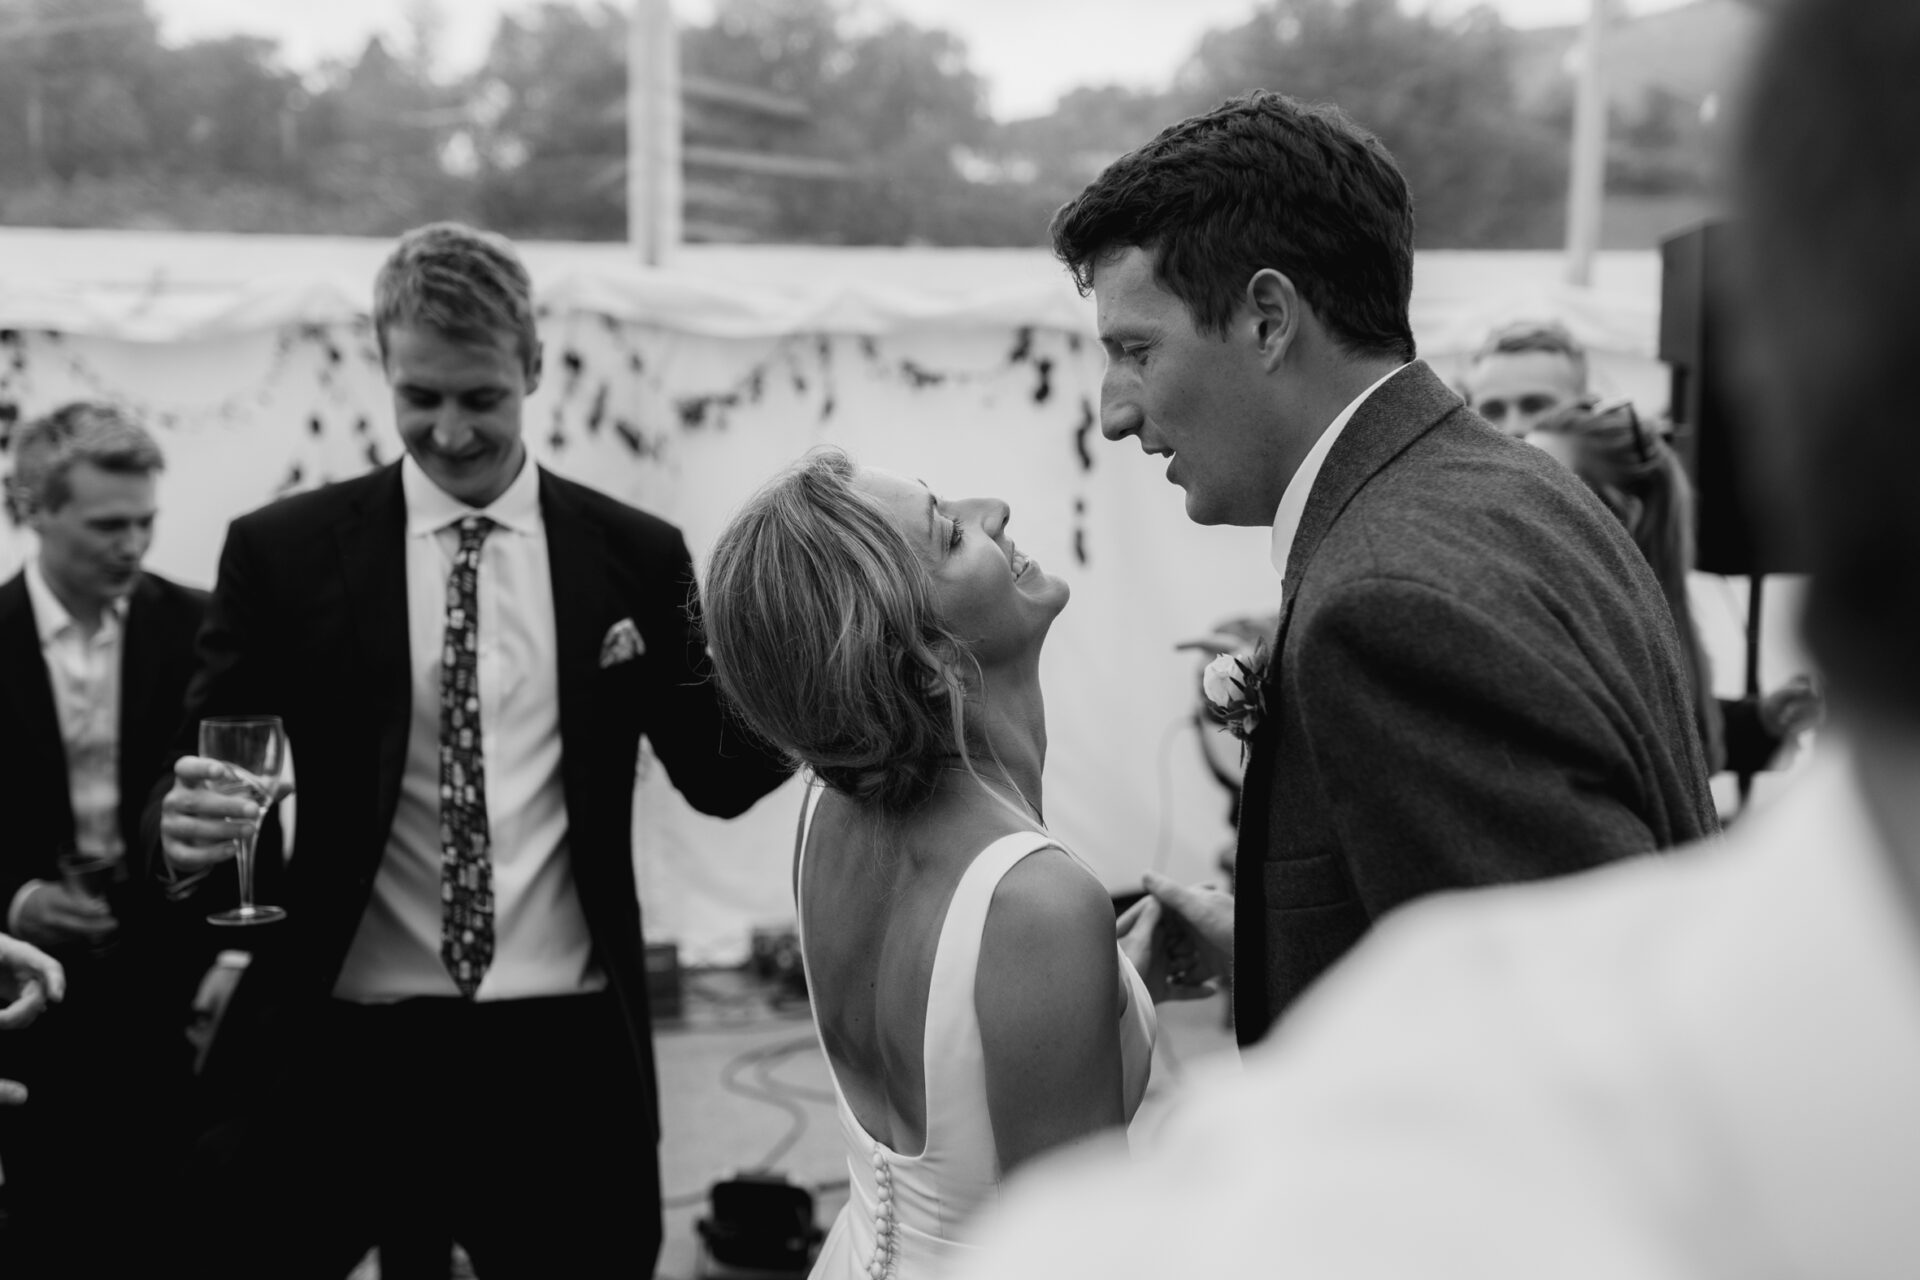 The bride and groom dance at their Devon marquee wedding